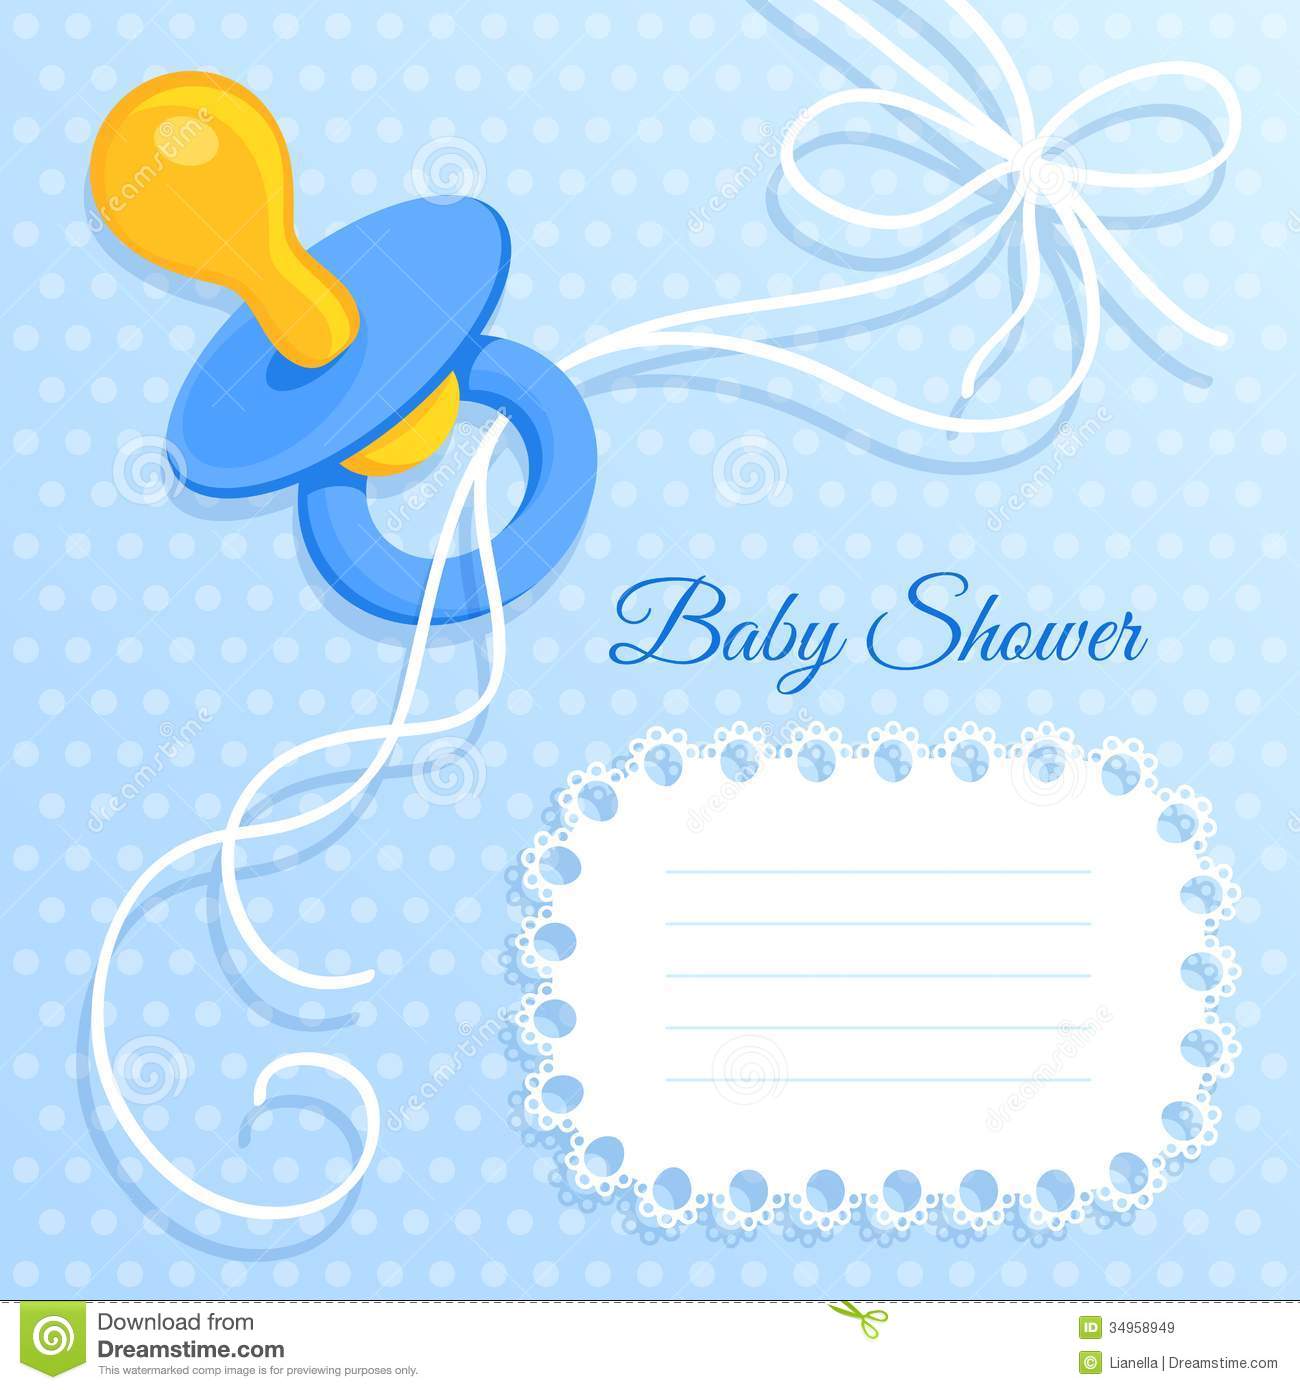 Full Size of Baby Shower:sturdy Baby Shower Invitation Template Image Concepts Baby Shower Invitation Template Baby Shower Greeting Cards Baby Shower Registry Baby Shower Rentals Arreglos Para Baby Shower Baby Shower Para Niño Baby Boy Invitation Templates